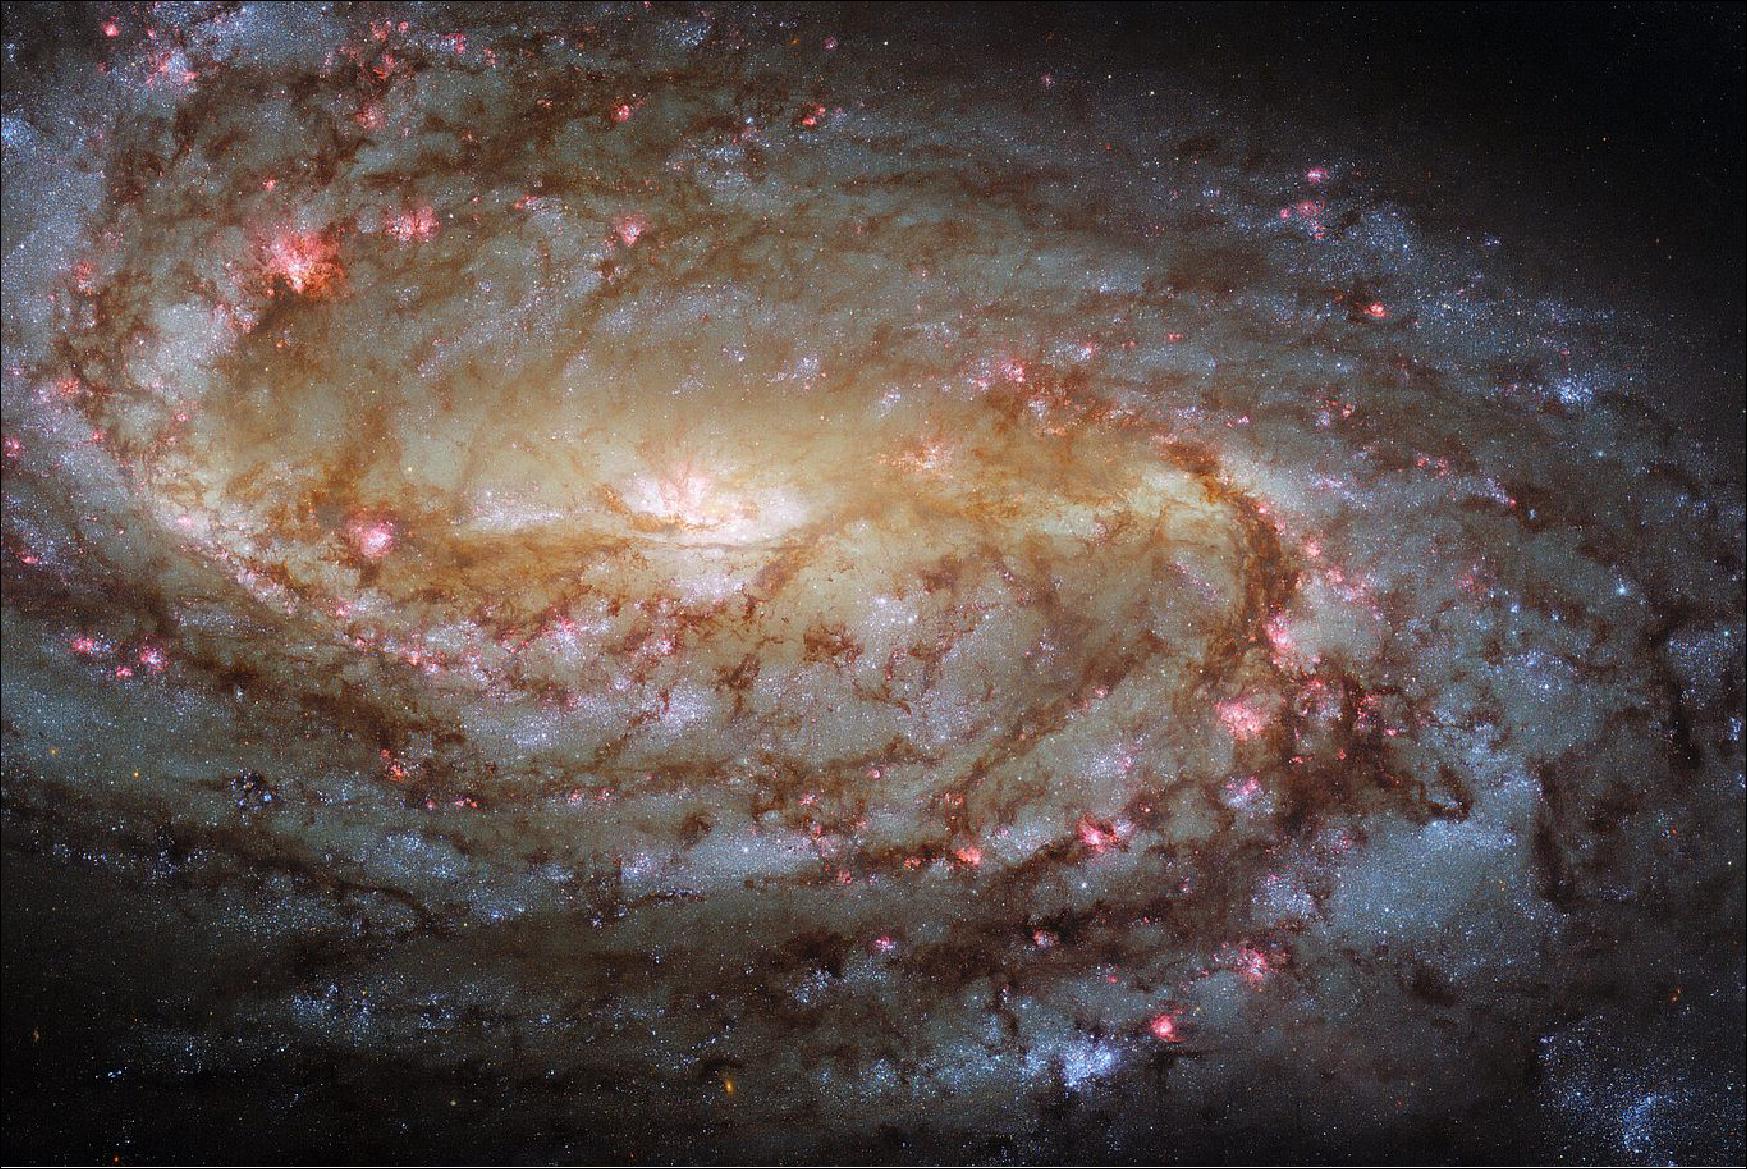 Figure 33: This jewel-bright Picture of the Week features the spiral galaxy NGC 2903. This image was captured using Hubble’s Advanced Camera for Surveys (ACS) and Wide Field Camera 3 (WFC3), which were installed on Hubble in 2002 and 2009, respectively. Interestingly, Hubble has observed this particular galaxy before, in 2001, when neither the ACS or the WFC3 had yet been installed. The 2021 image boasts higher resolution, which means that NGC 2903 is more finely detailed than in the 2001 image. The ACS and WFC2 collectively cover a wide range of ultraviolet, optical and infrared wavelengths, which means that the 2021 image also has superior wavelength coverage to that of its 20-year-old predecessor. The 2001 image was taken using the Wide Field Planetary Camera 2 (WFPC2), which was Hubble’s workhorse instrument from 1993 until 2009 when it was replaced by the WFC3 (image credit: ESA/Hubble & NASA, L. Ho, J. Lee and the PHANGS-HST Team; CC BY 4.0)